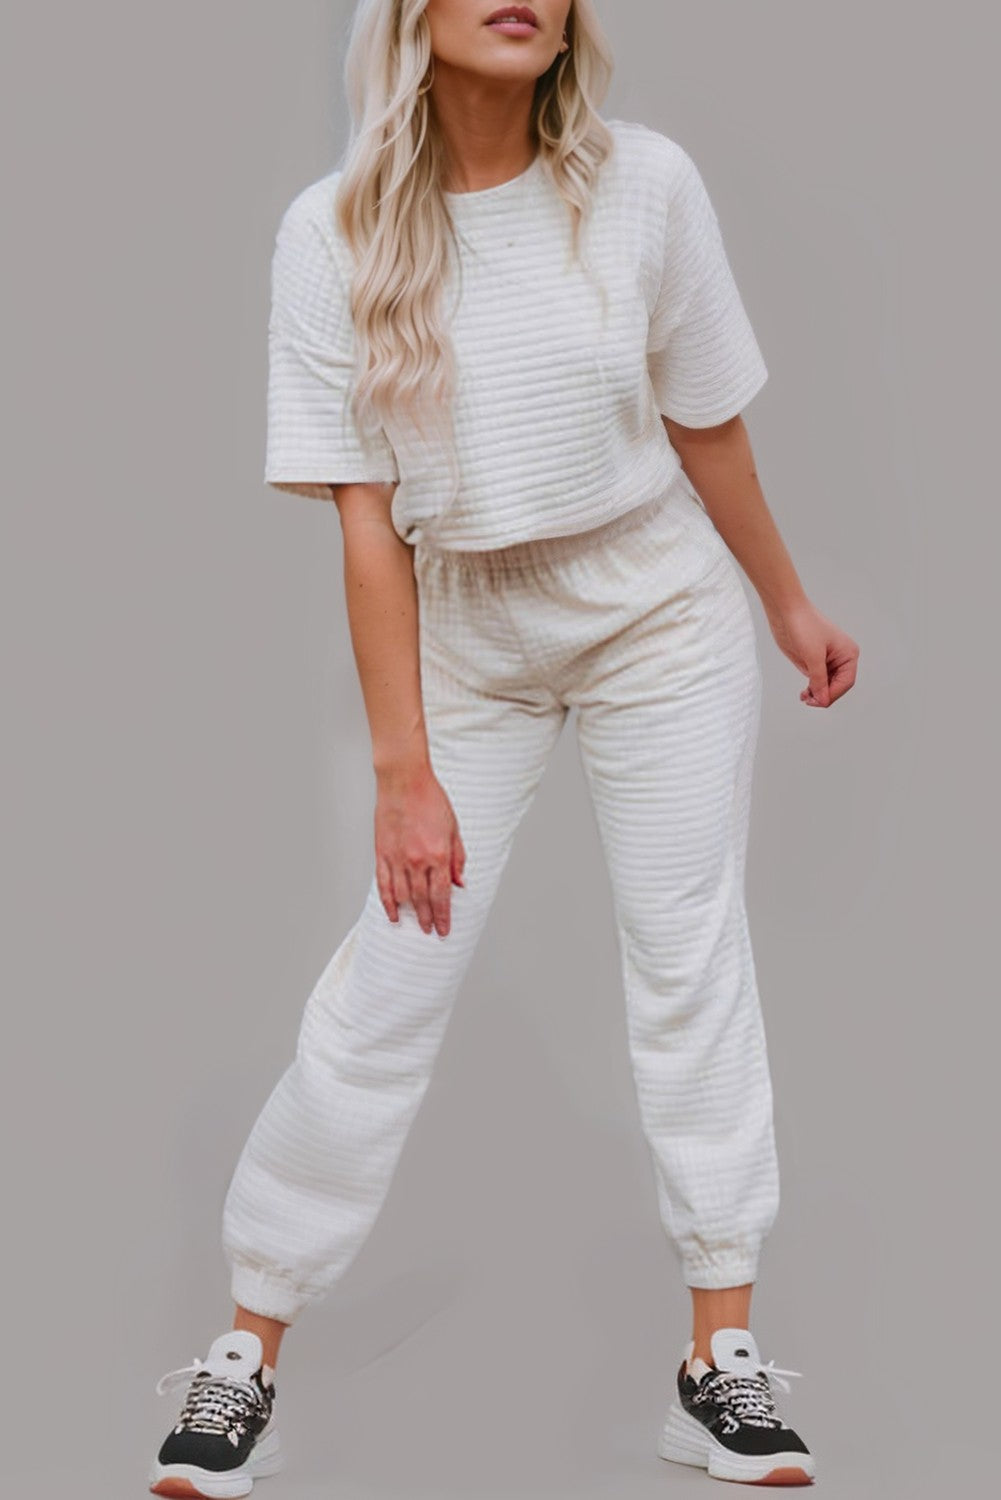 White Lattice Textured Crop Tee and Jogger Pants